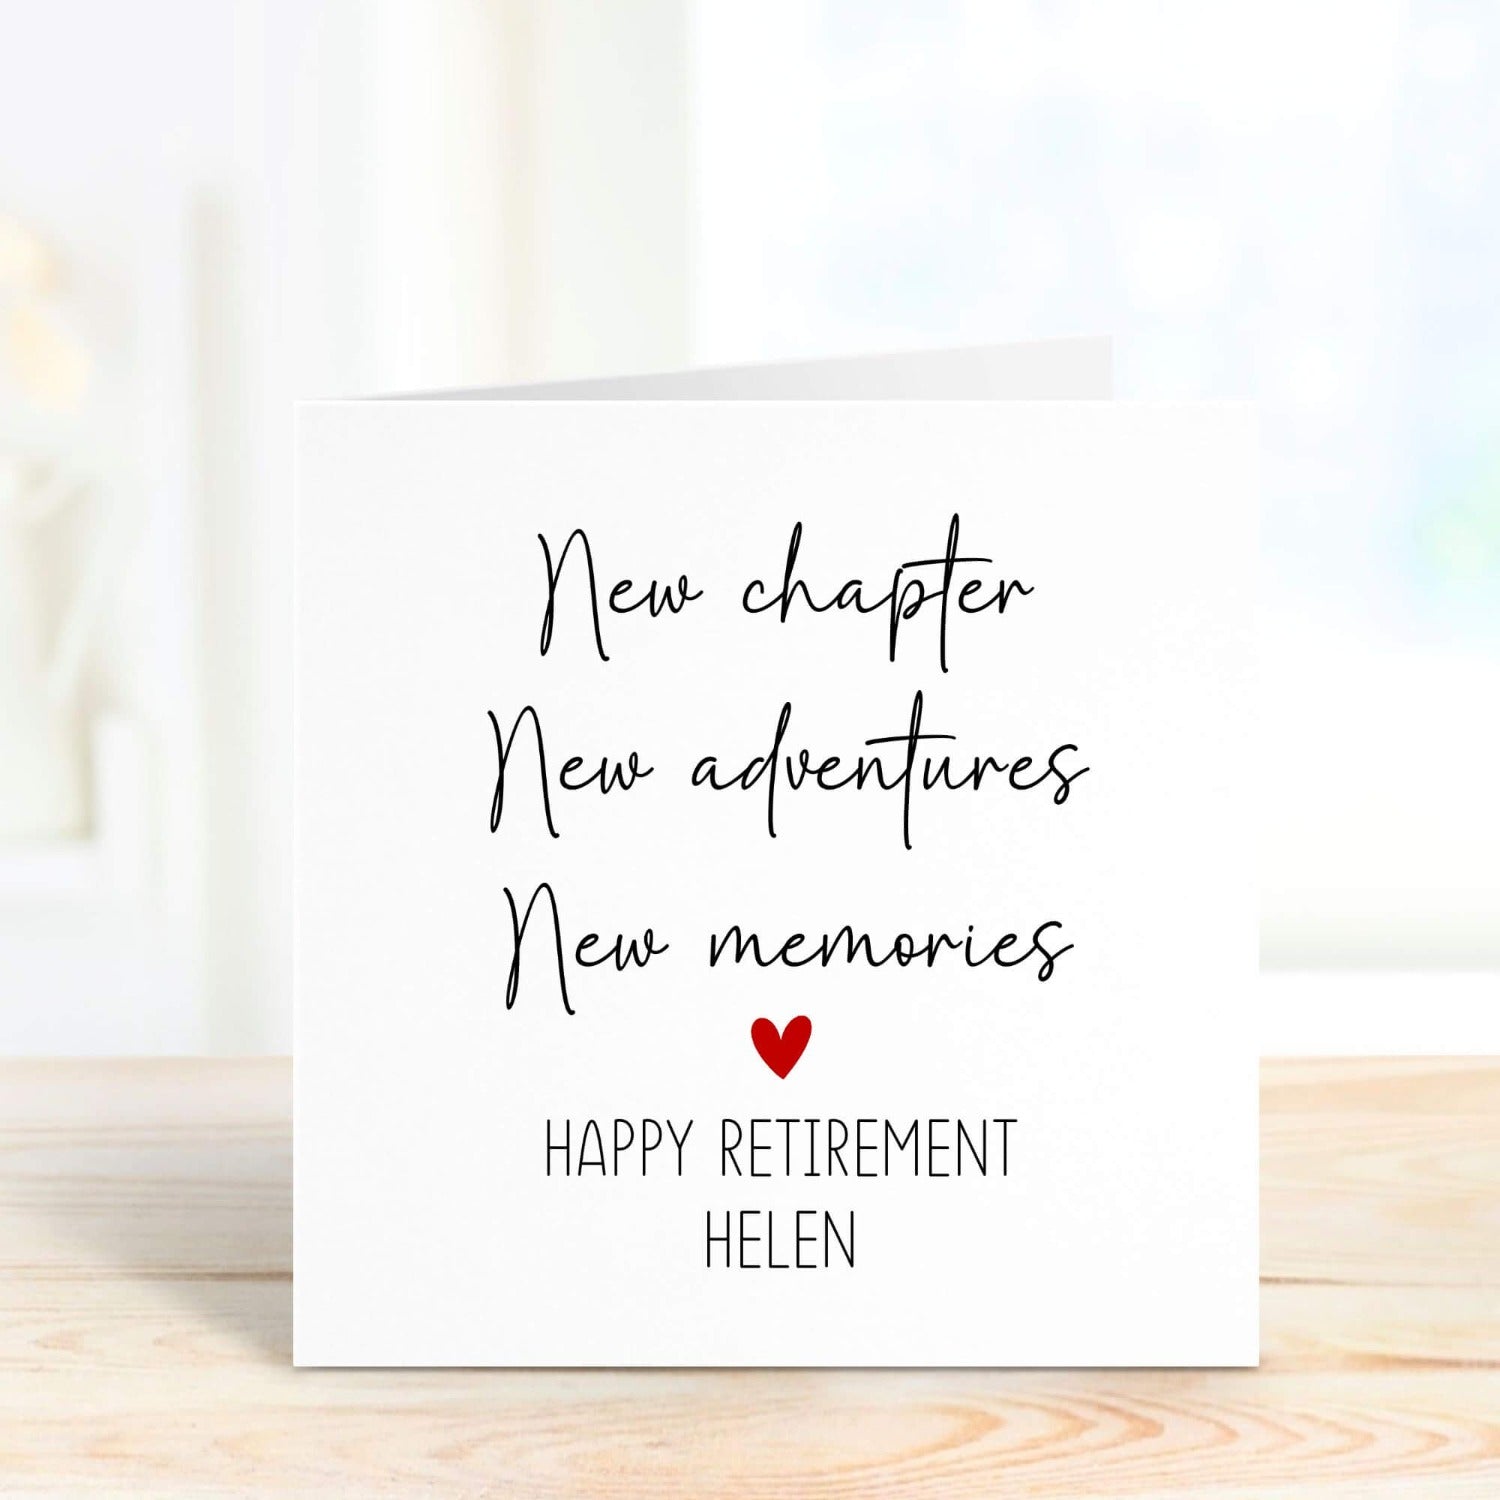 personalised retirement card with the words new chapter, new adventures and new memories